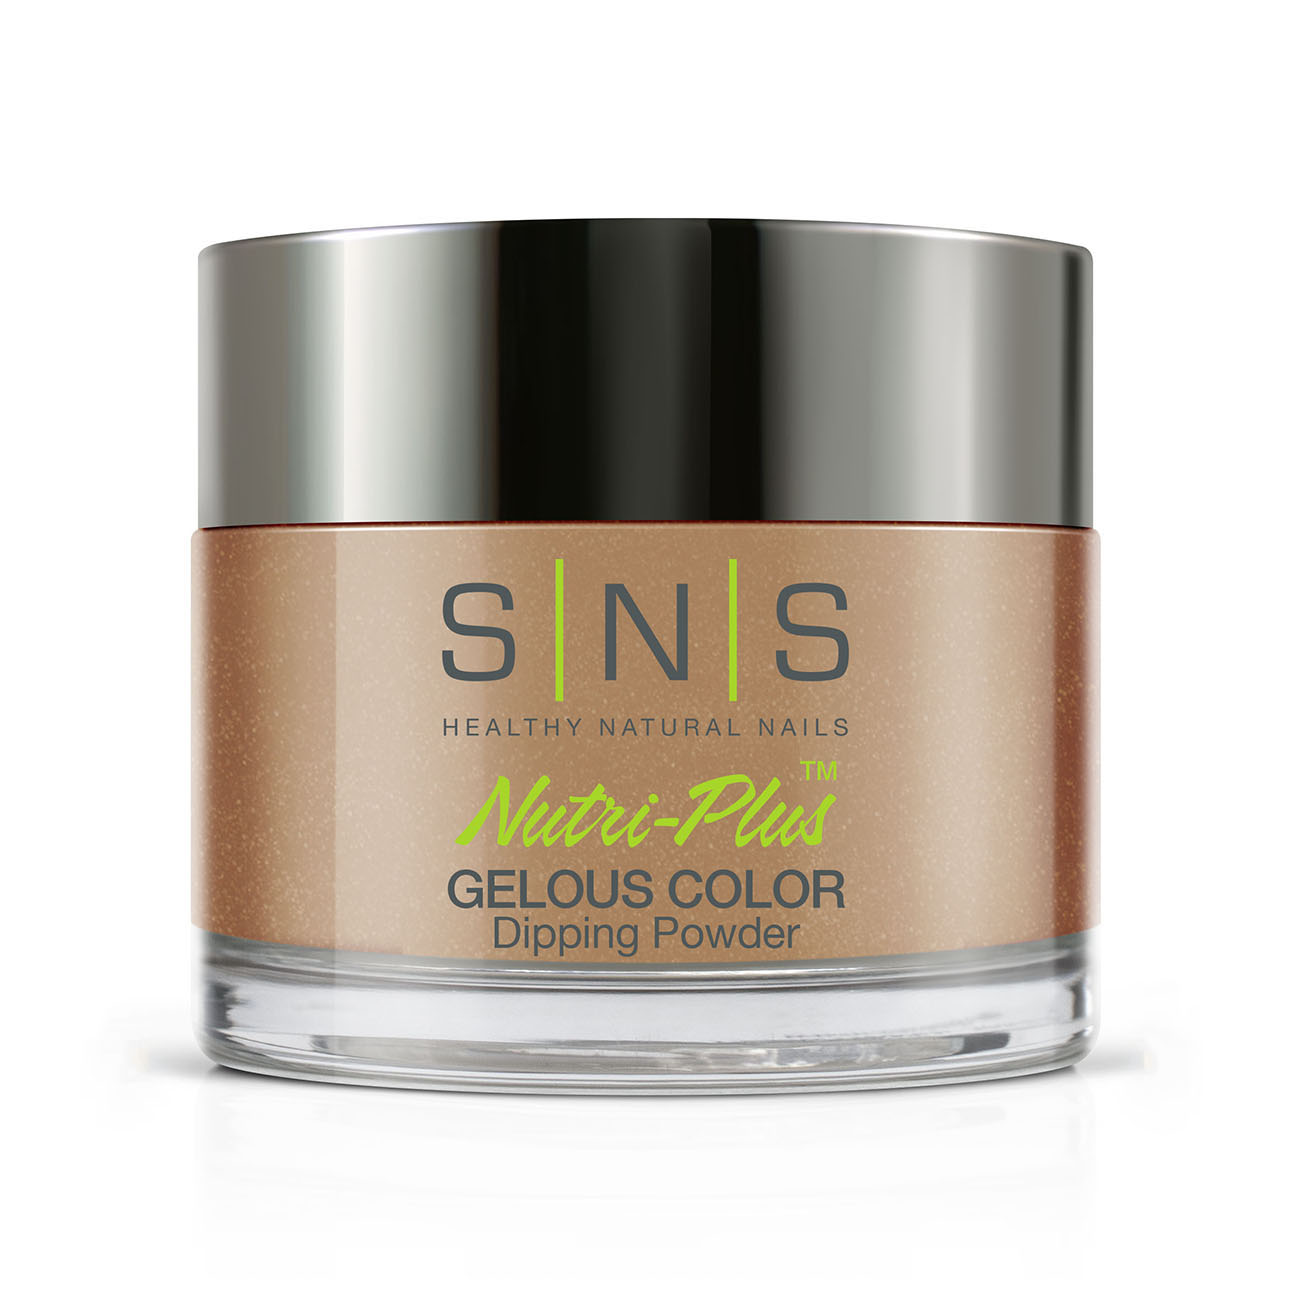 SNS Nails EC08 Keeping Up With the Joneses 28g (1oz) | Gelous Dipping Powder